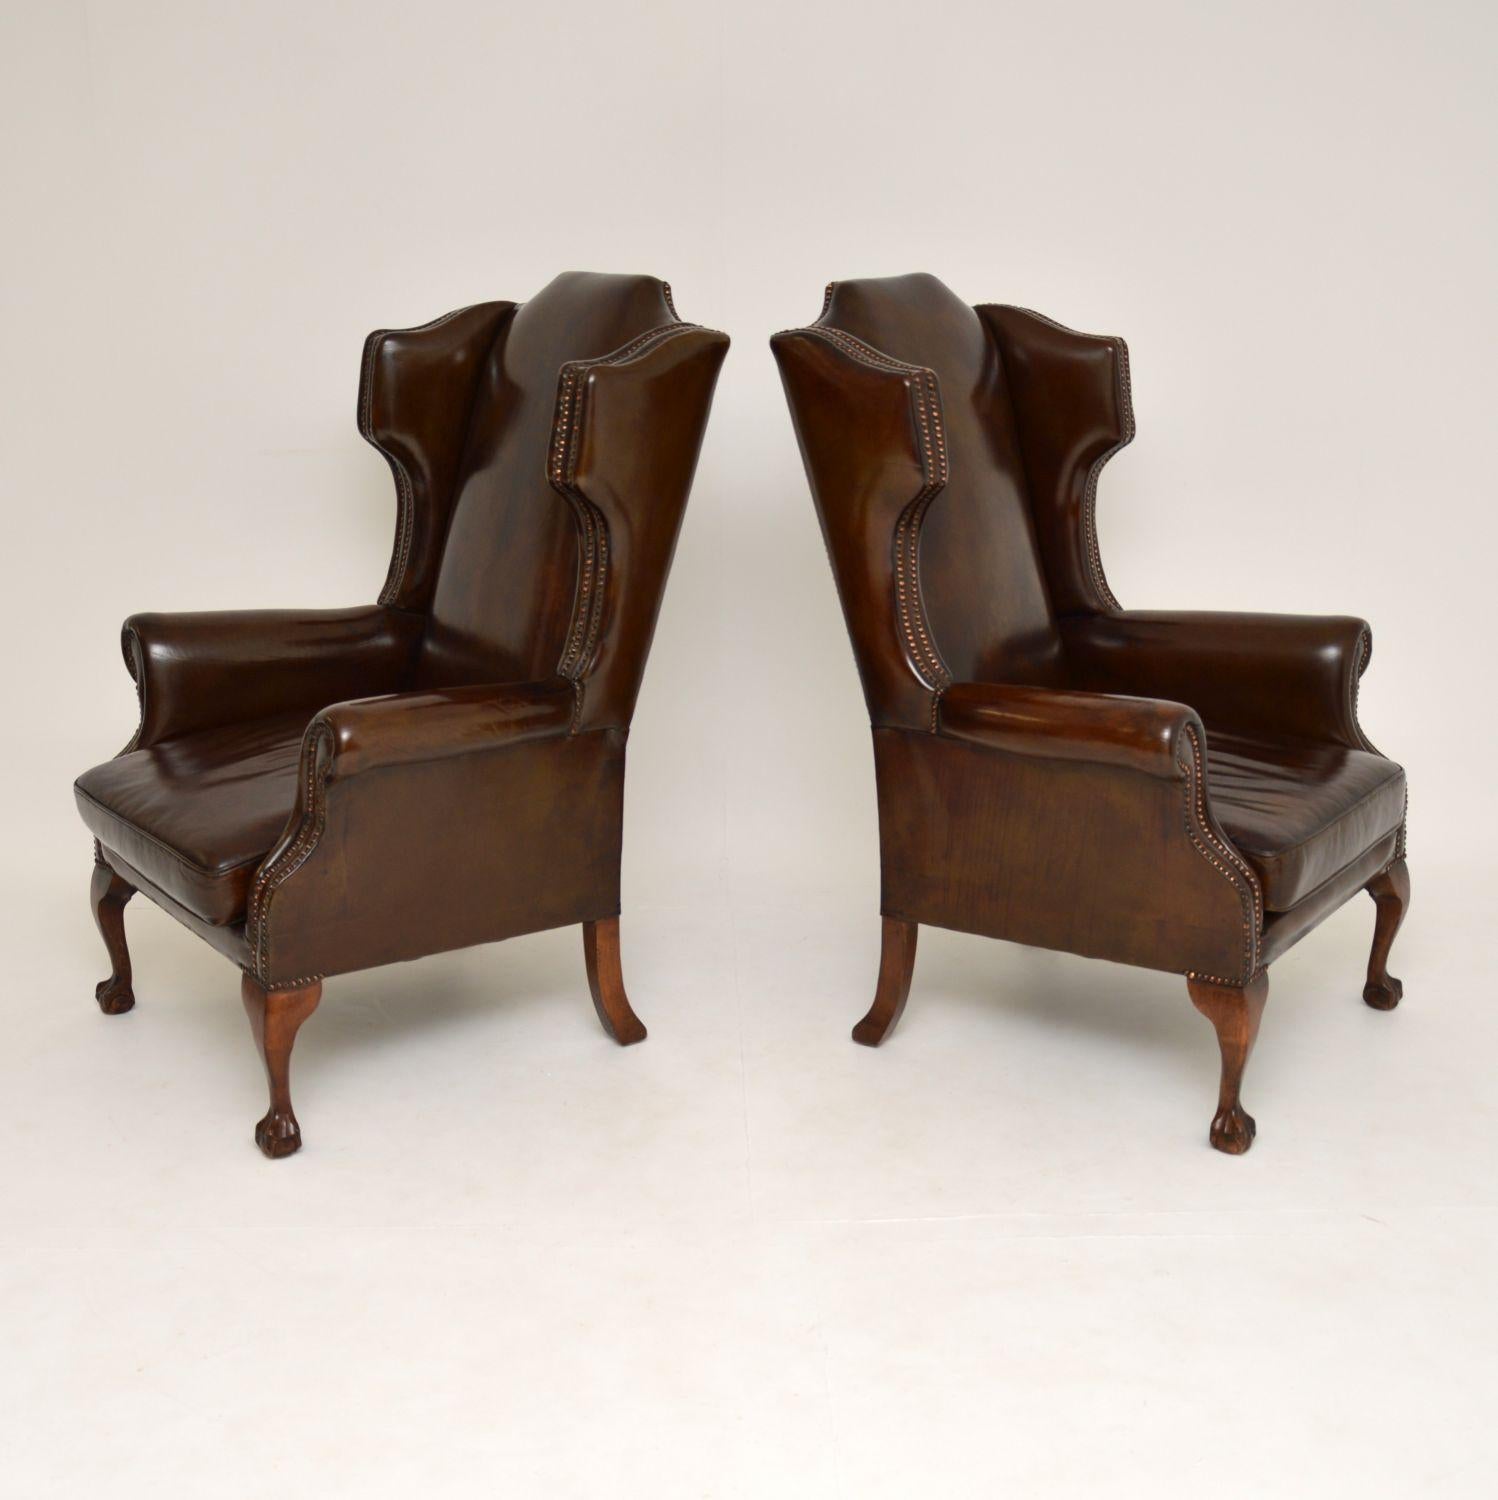 A stunning pair of top quality leather wing back armchairs, in the antique Georgian style, dating from circa 1930s period.

They have a gorgeous and unusual shape and are also extremely comfortable, with generous proportions. They have double